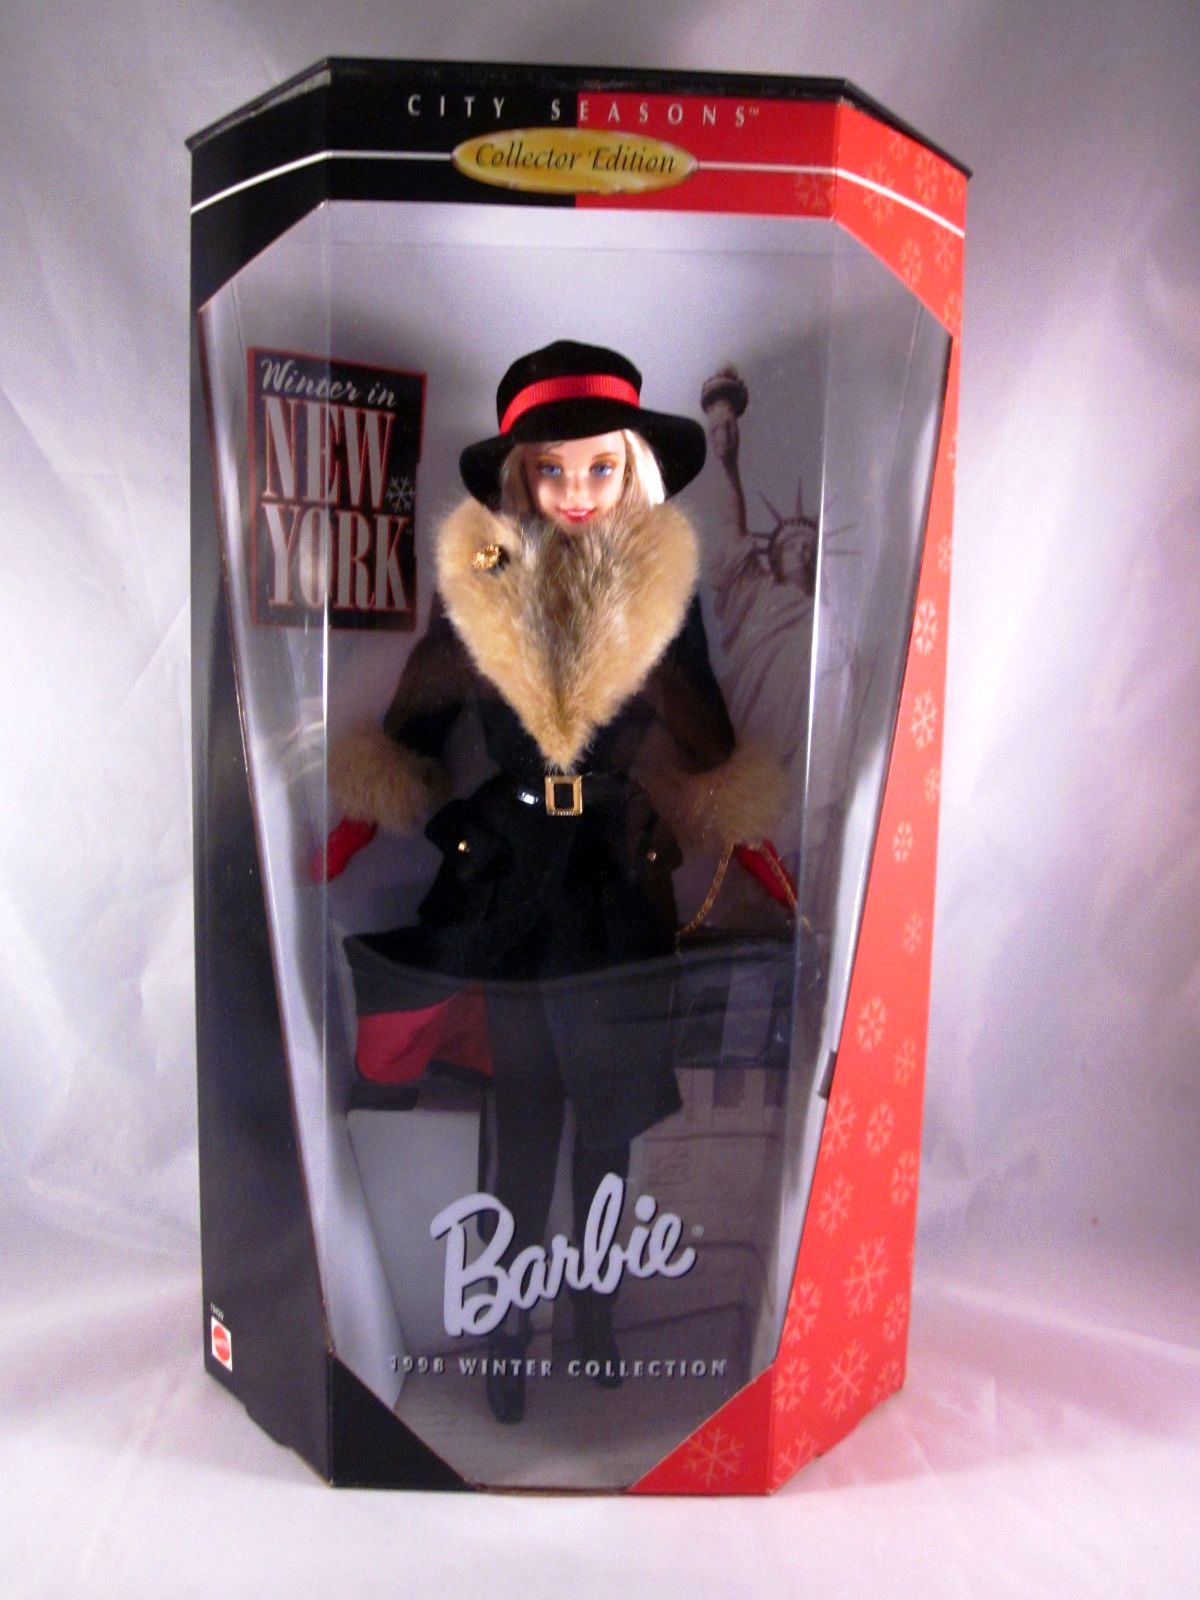 Winter In New York Barbie “2nd In A Series” (City Seasons (The Winter ...